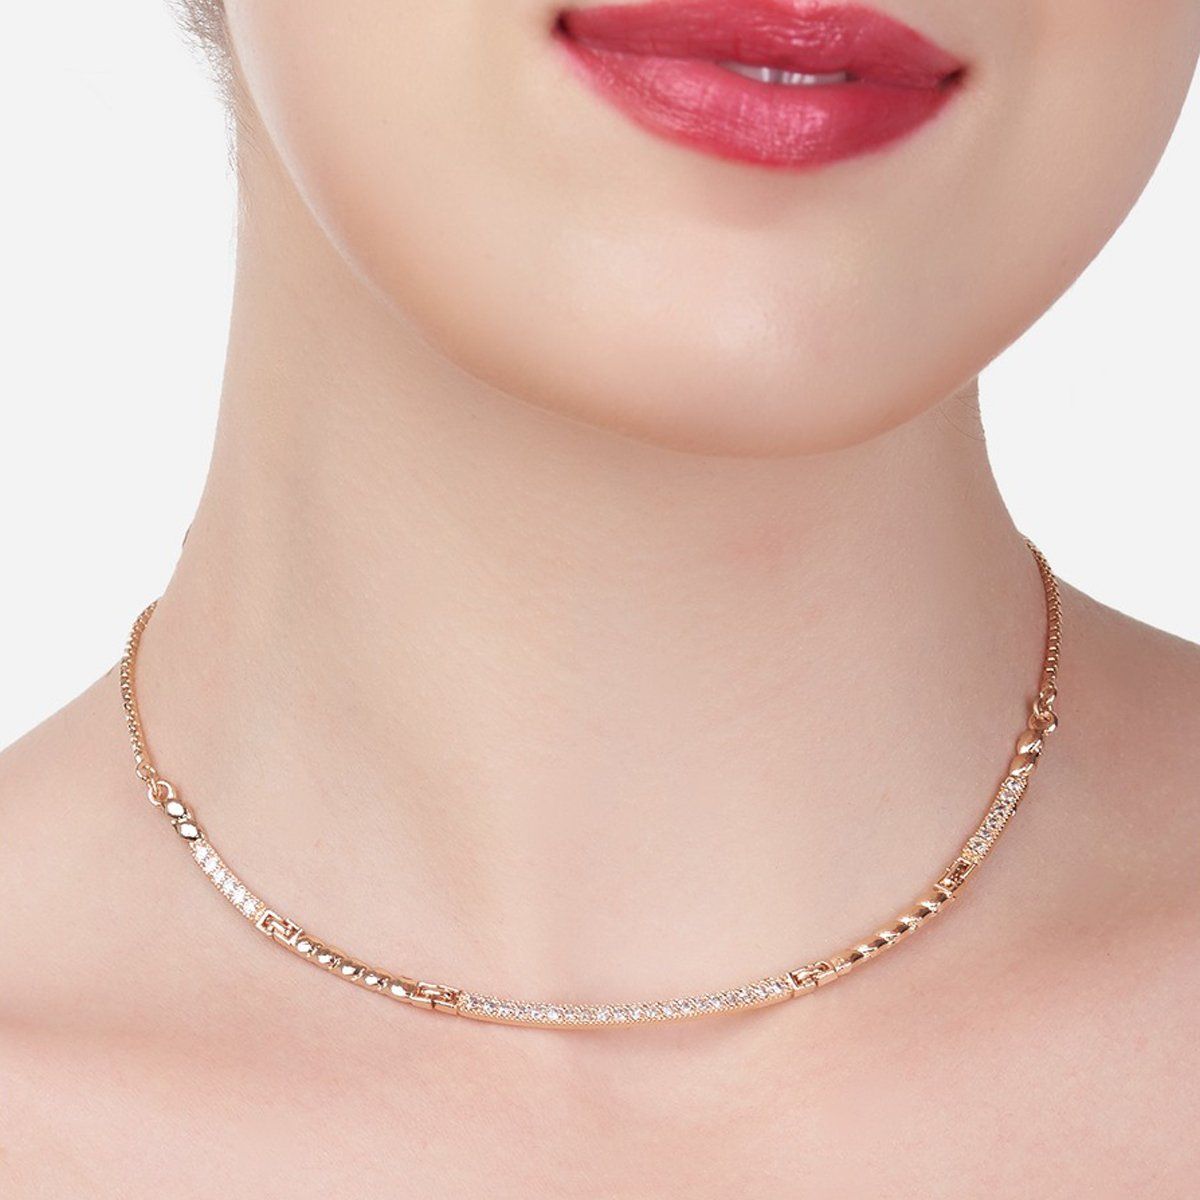 Zaveri Pearls Rose Gold Contemporary Cubic Zirconia Sleek Necklace-ZPFK15265: Buy Zaveri Pearls Rose Gold Contemporary Cubic Zirconia Sleek Necklace-ZPFK15265 at Price in India | Nykaa